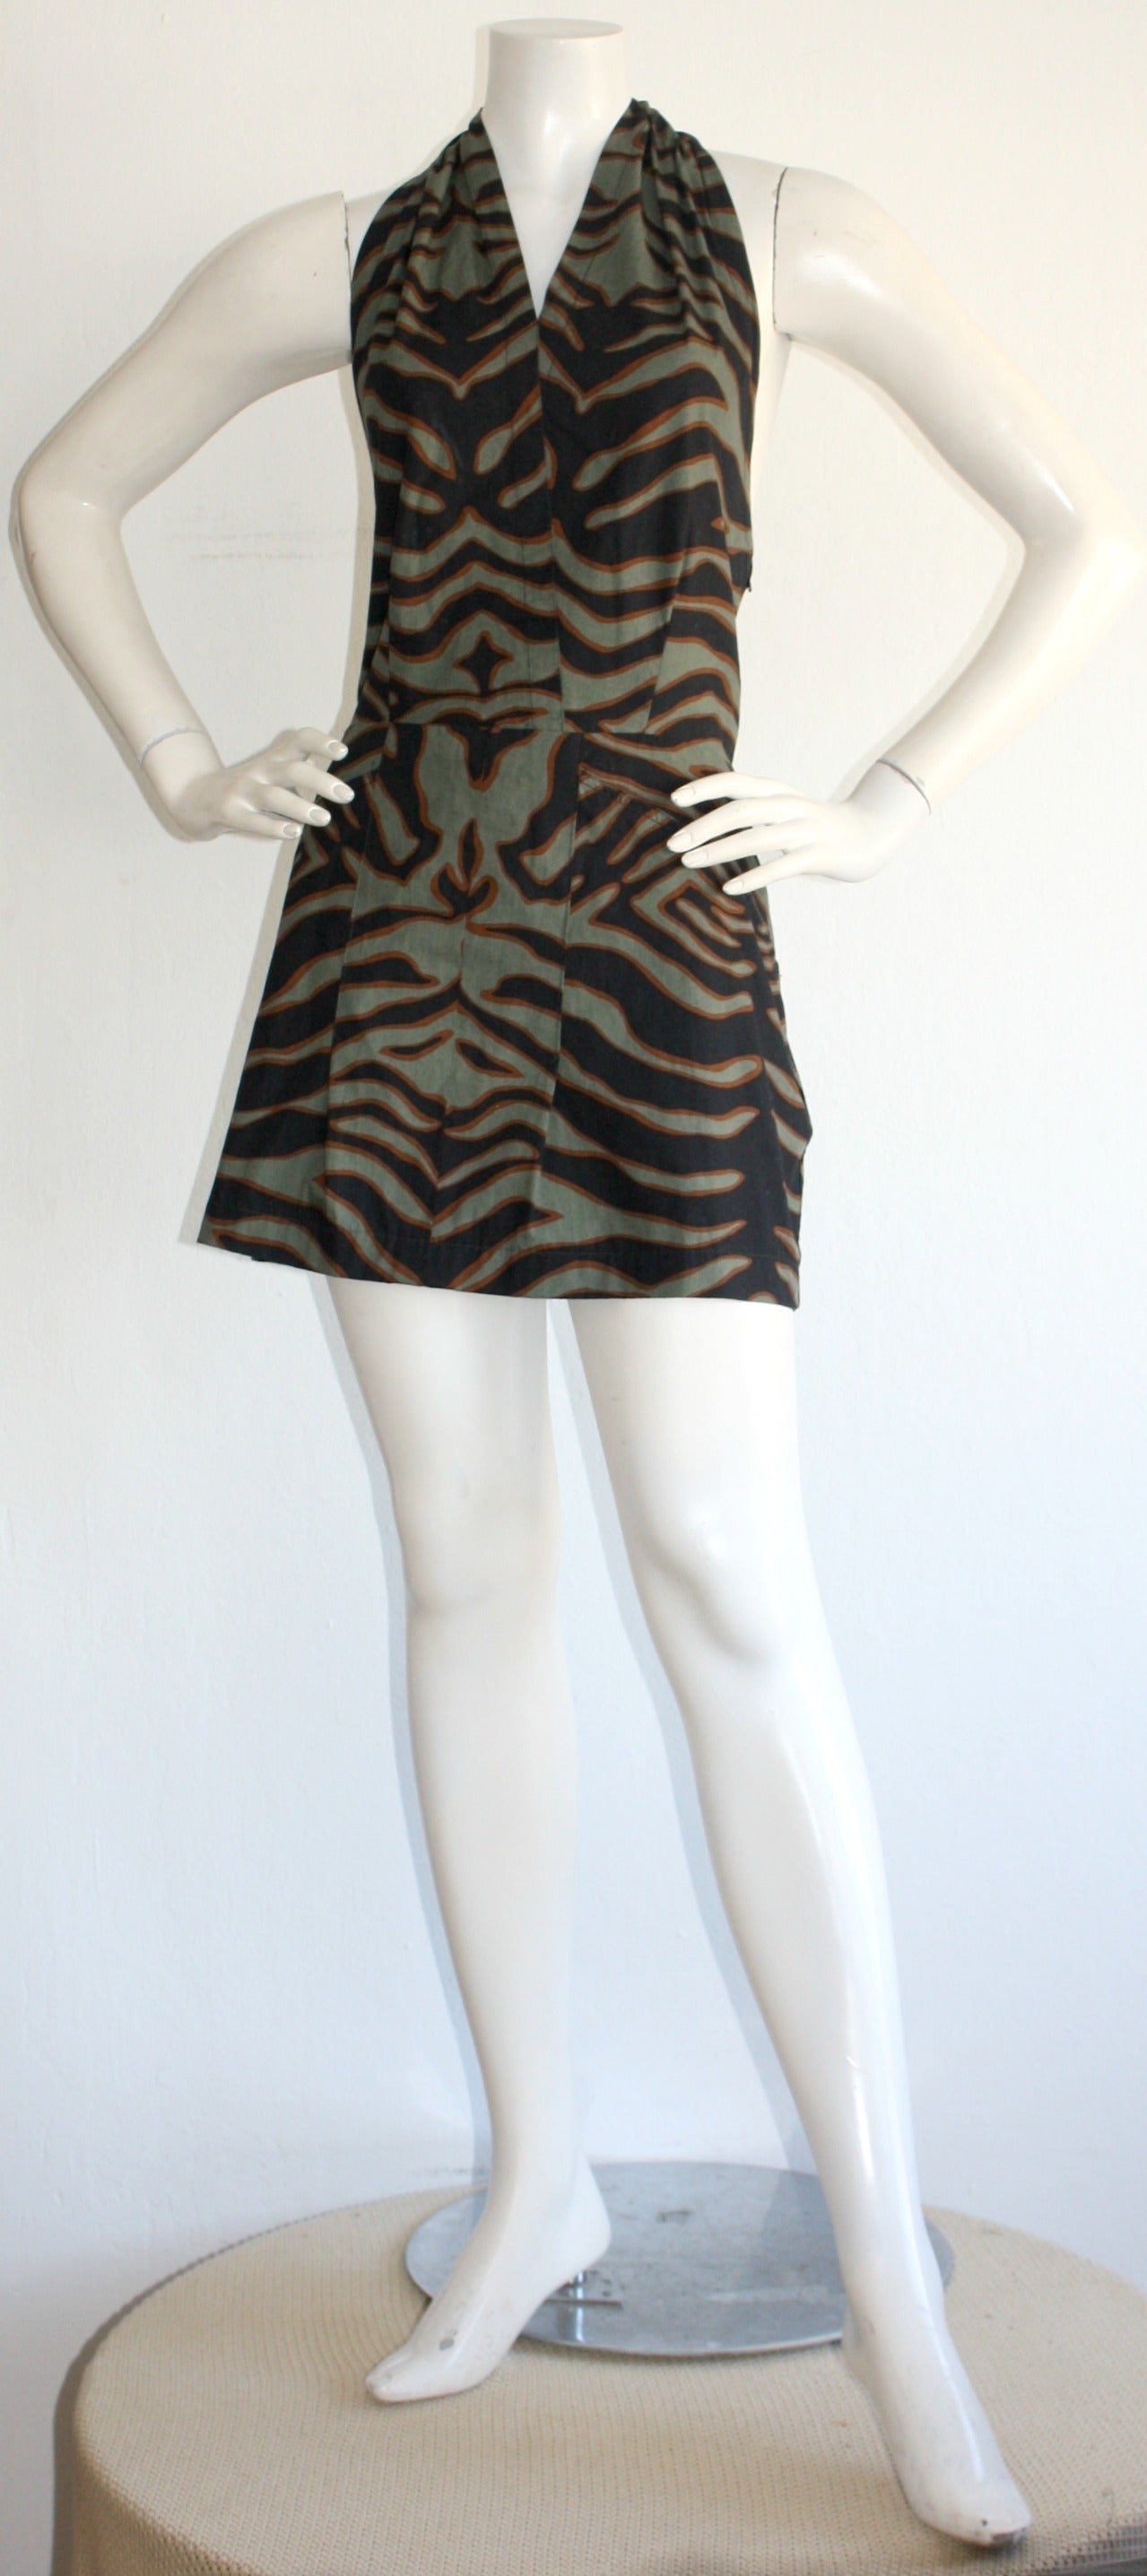 Extremely Rare vintage YSL Rive Gauche cotton safari tie halter neck dress! Features an incredible, Avant Garde zebra print, that form two zebra body motifs at waist. Ultra important piece, with so much fashion history. Easily transitions from day